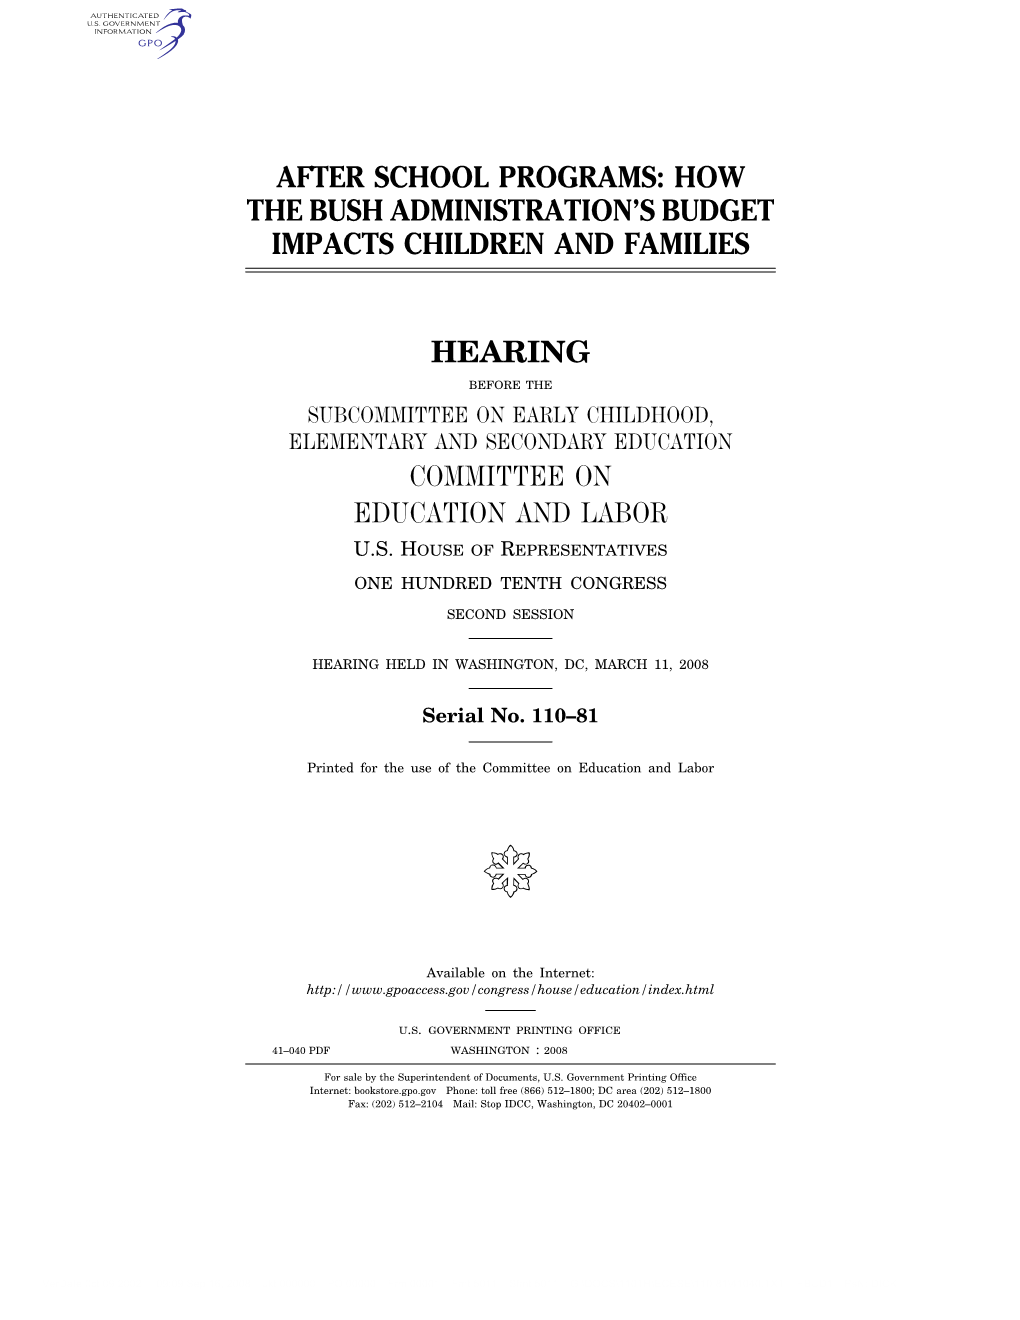 After School Programs: How the Bush Administration’S Budget Impacts Children and Families